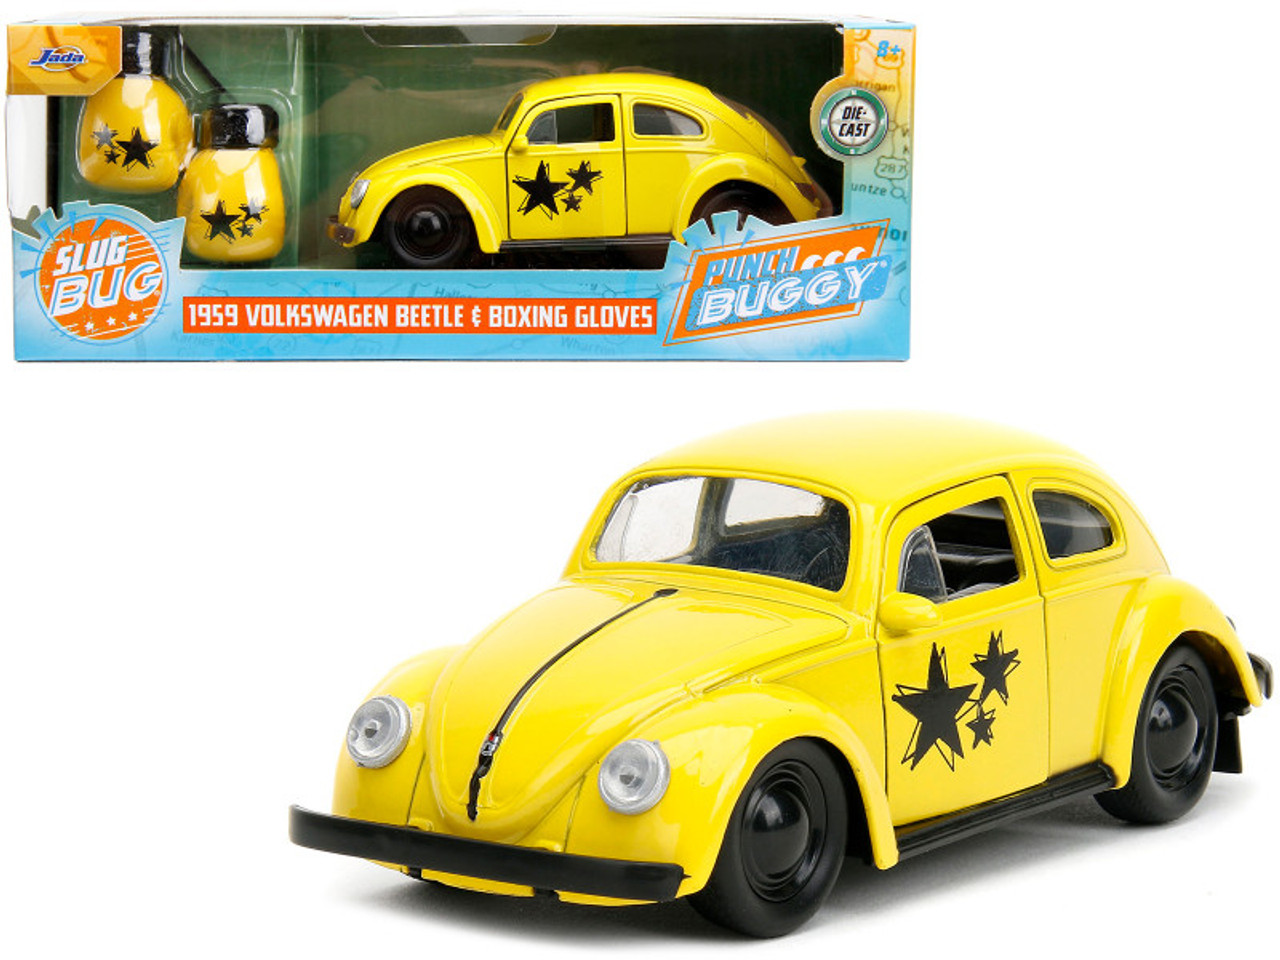 1959 Volkswagen Beetle Yellow with Black Graphics and Boxing Gloves Accessory "Punch Buggy" Series 1/32 Diecast Model Car by Jada